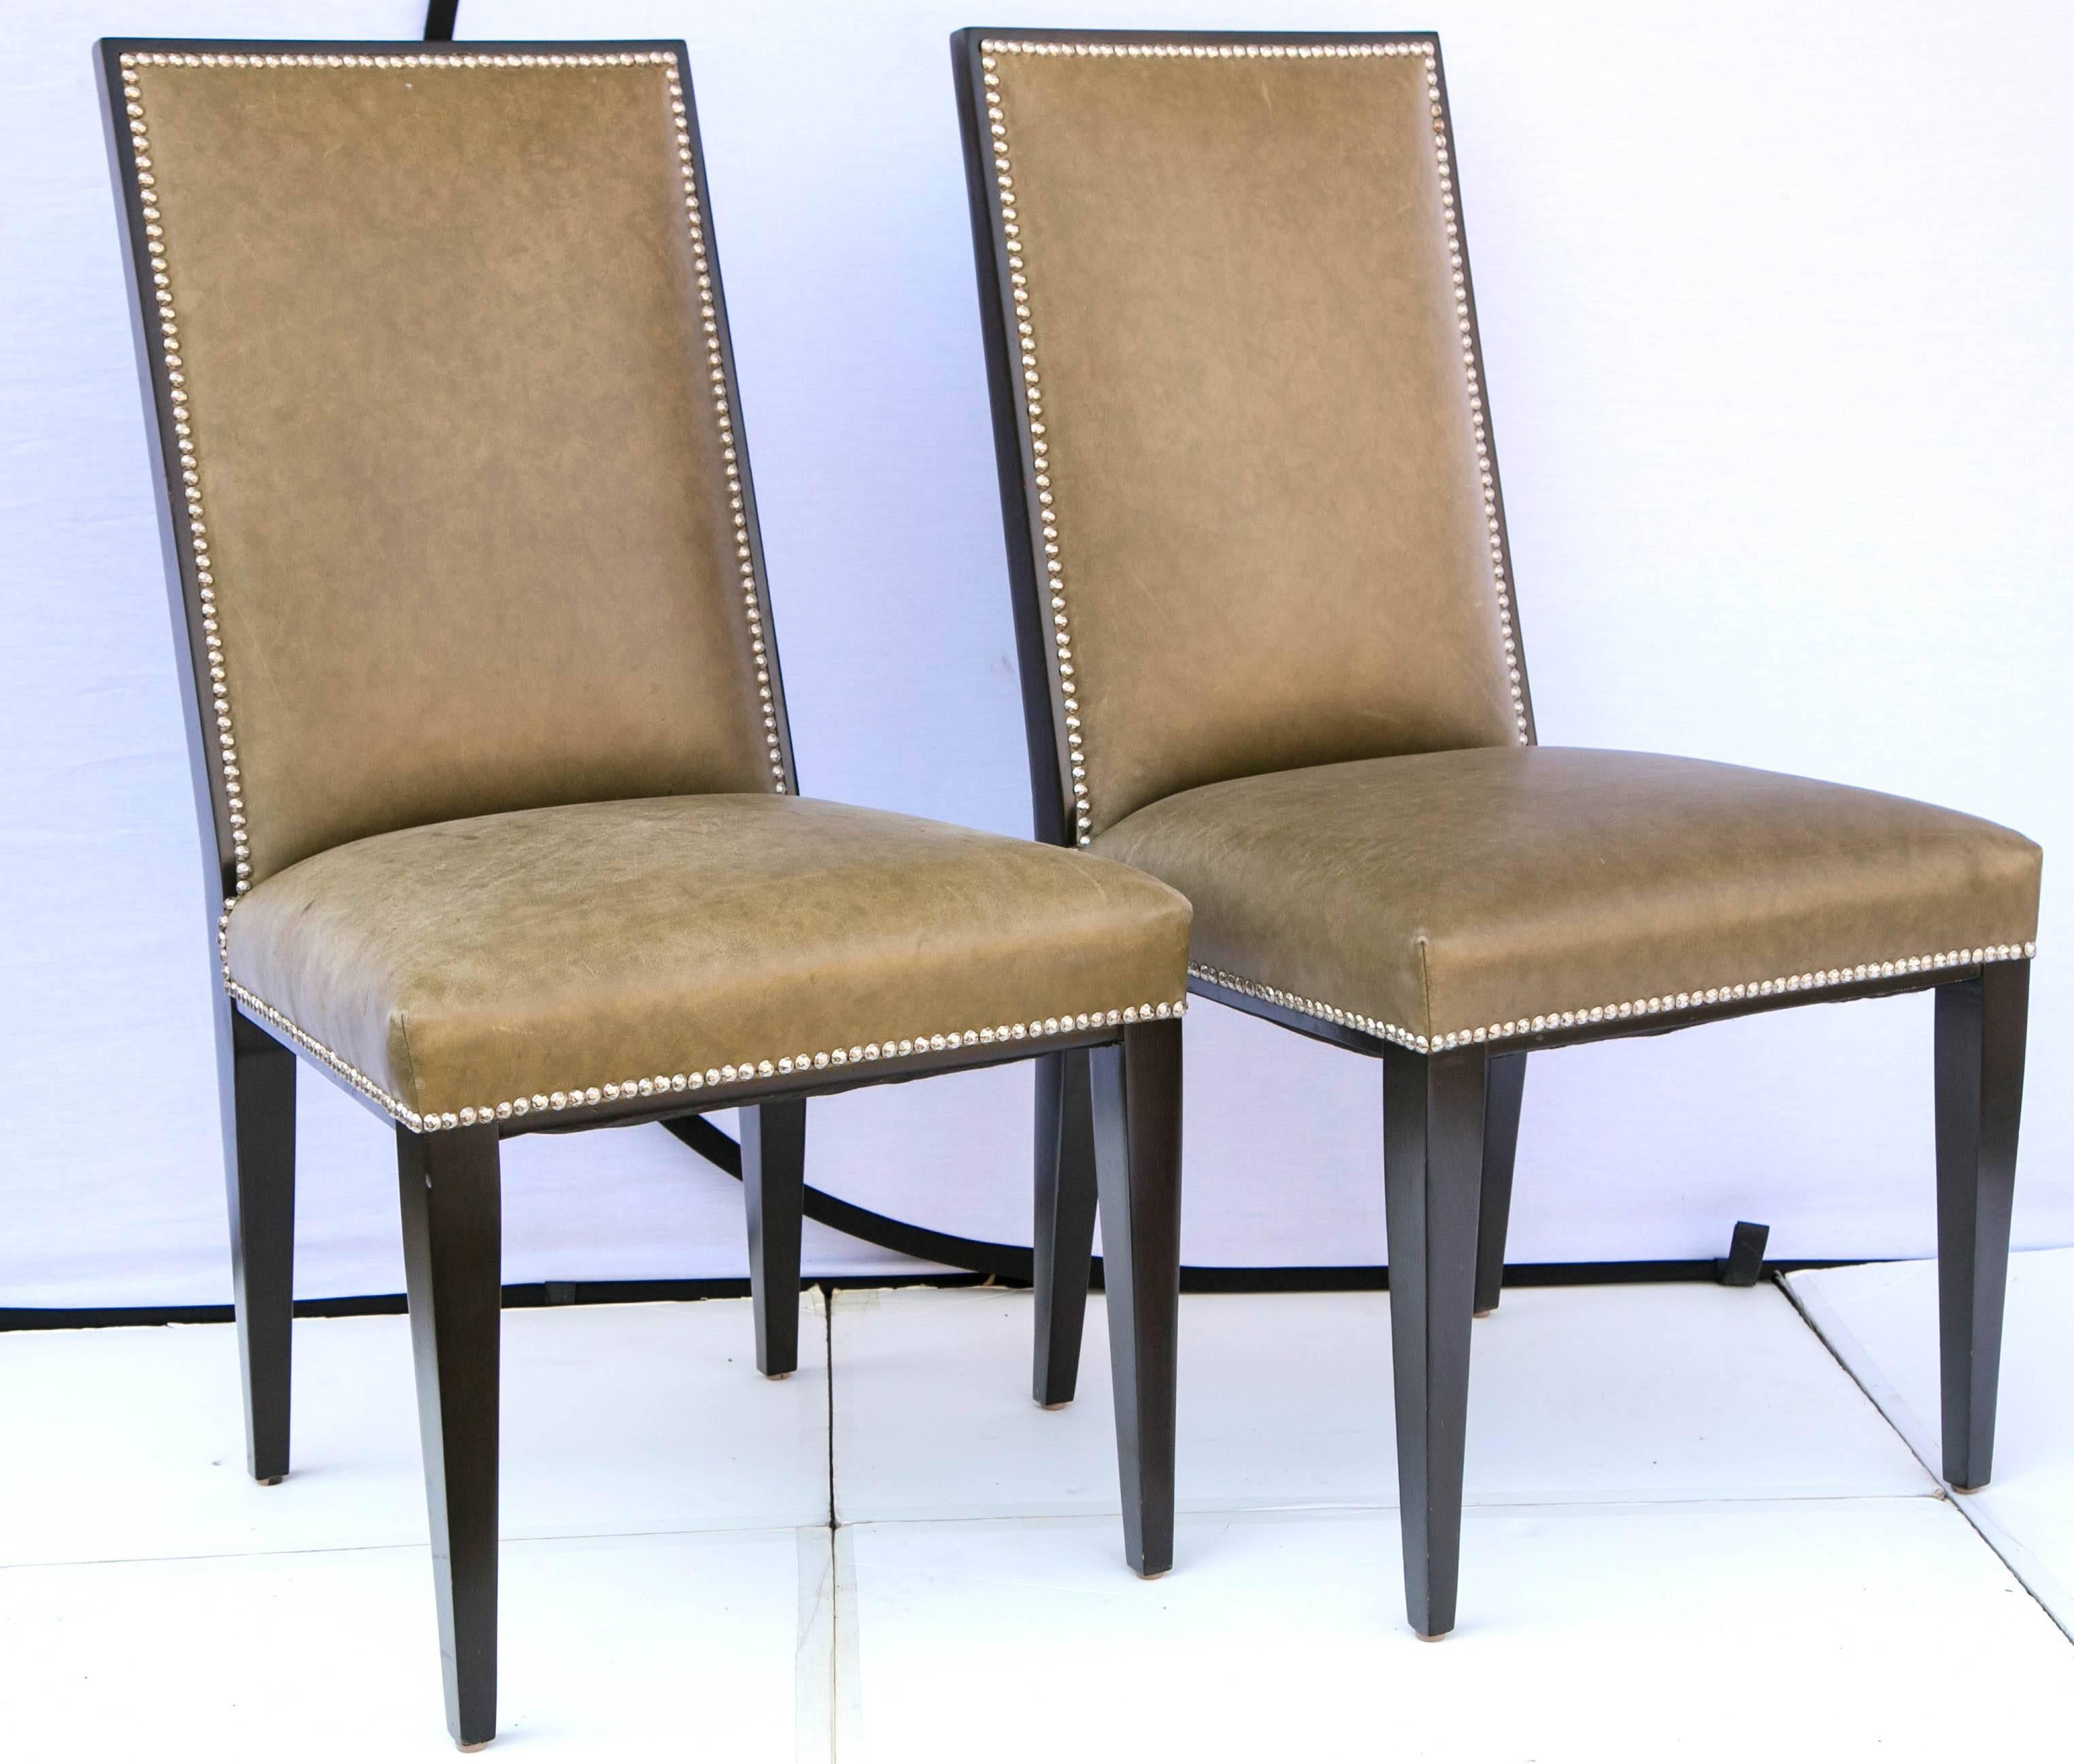 Set of Eight  Modern Taupe Green Leather Dining Chair Style of Ralph Lauren. The legs are a hardwood stained Espresso. The perimeters of the chairs are decorated with nail head design and a hardwood Espresso frame. The leather is in a soft calm